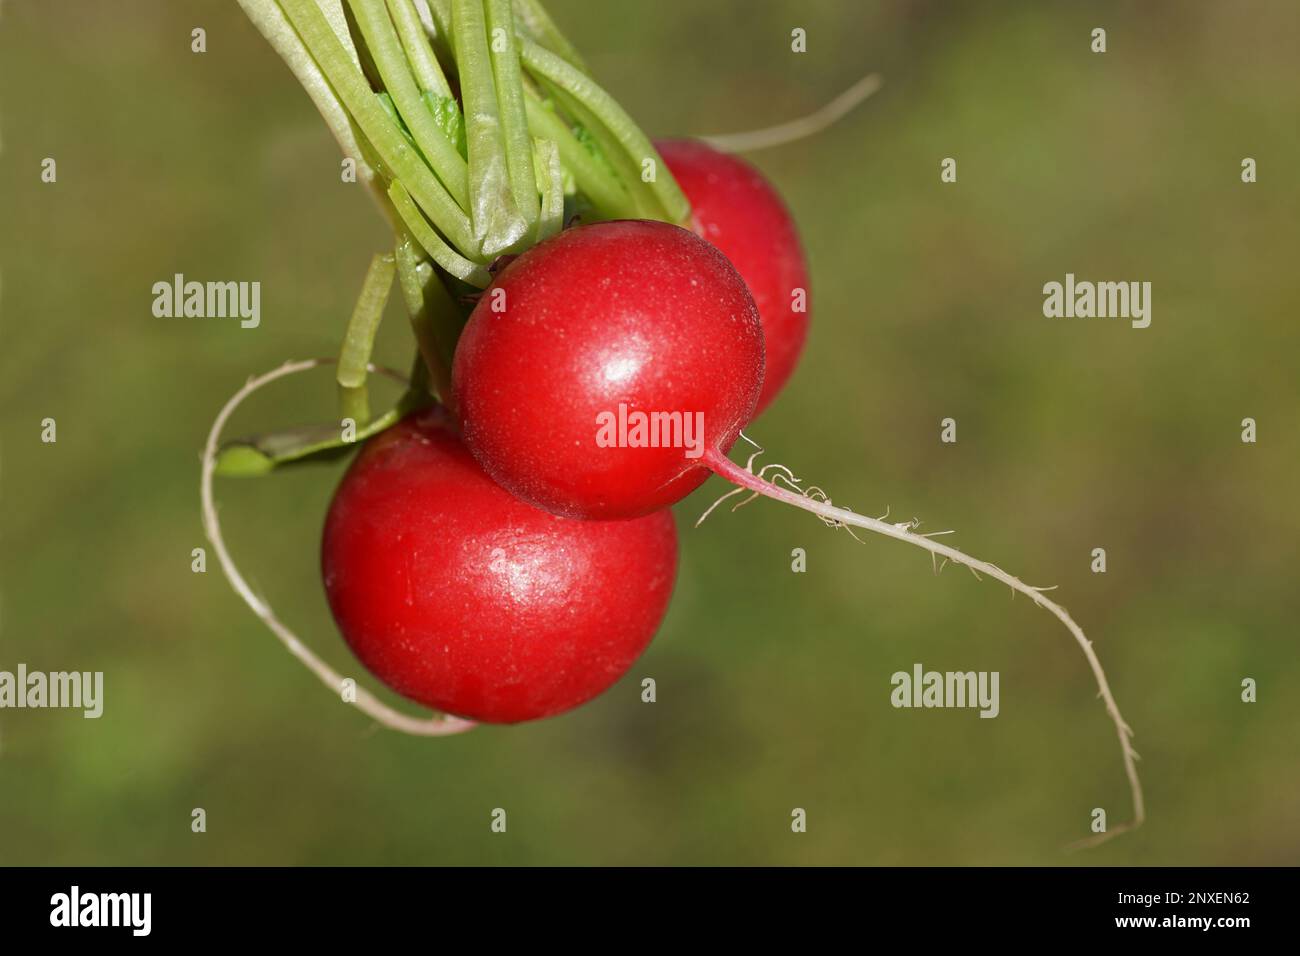 Closeup three Dutch red radishes with stem with a green background. Radish (Raphanus raphanistrum subsp. sativus) an edible root vegetable, Stock Photo